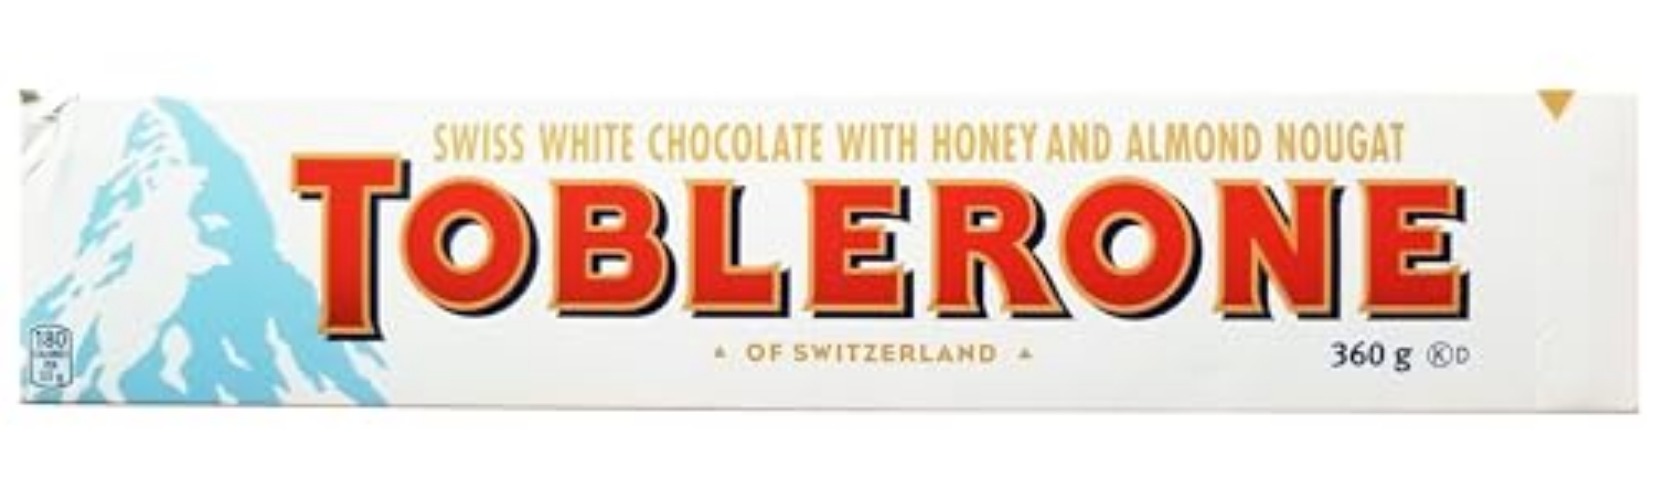 TOBLERONE, White Chocolate Bar with Honey and Almond Nougat, Holiday Gifts, Holiday Chocolate, 360 g - White Chocolate